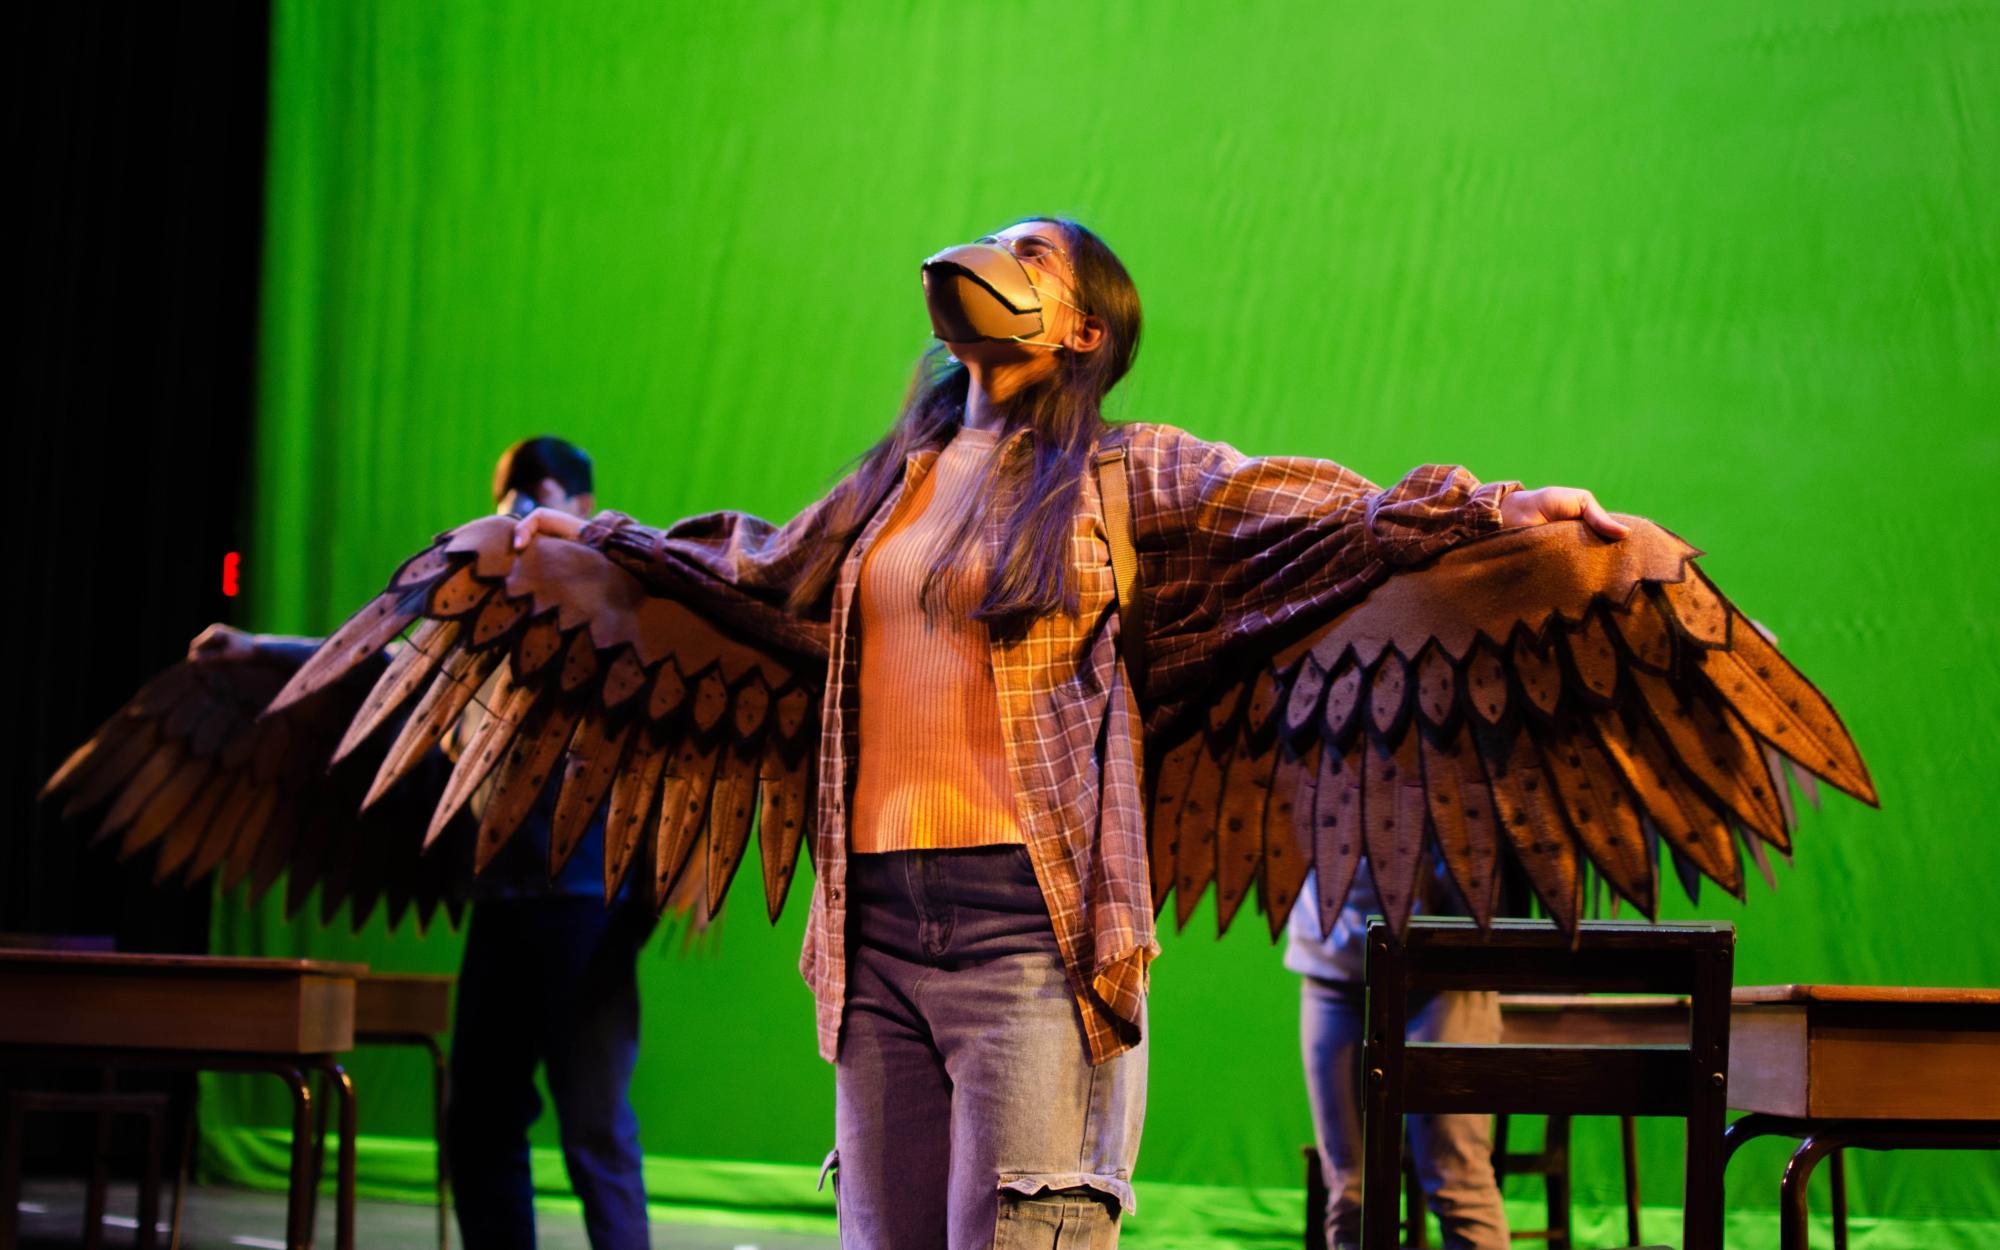 actress wearing detailed wings made out of leather and a bird beak